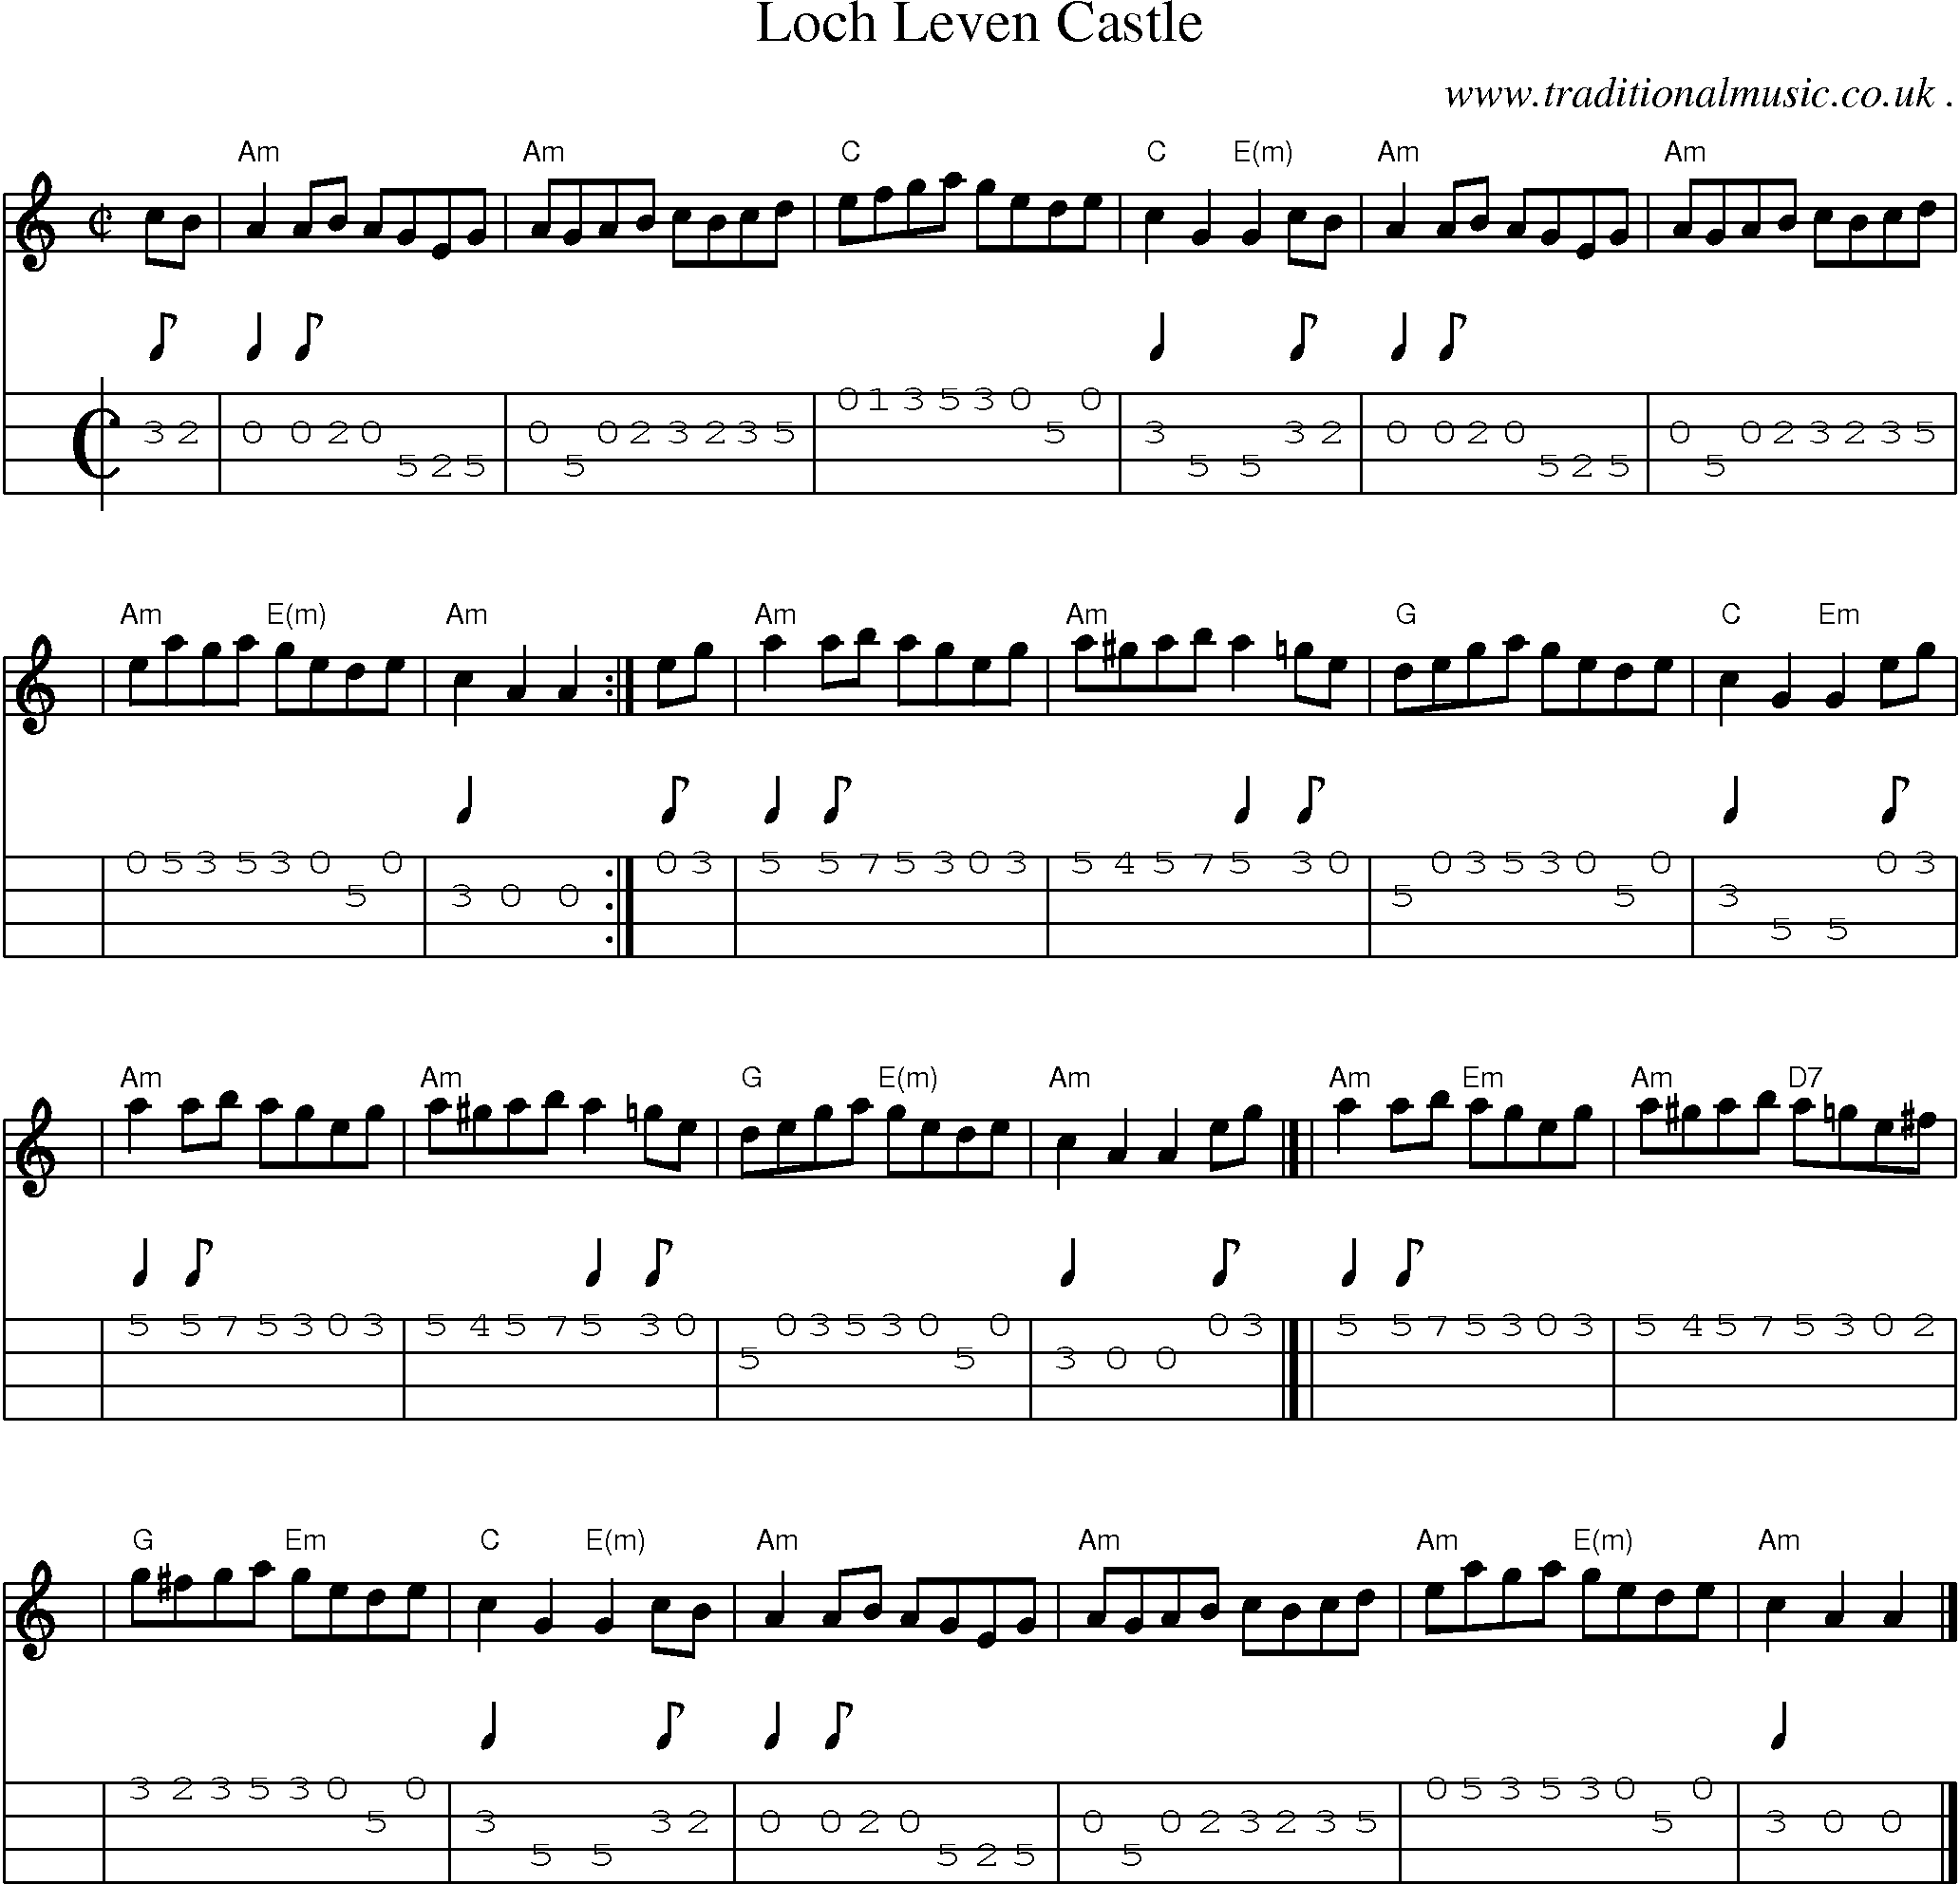 Sheet-music  score, Chords and Mandolin Tabs for Loch Leven Castle